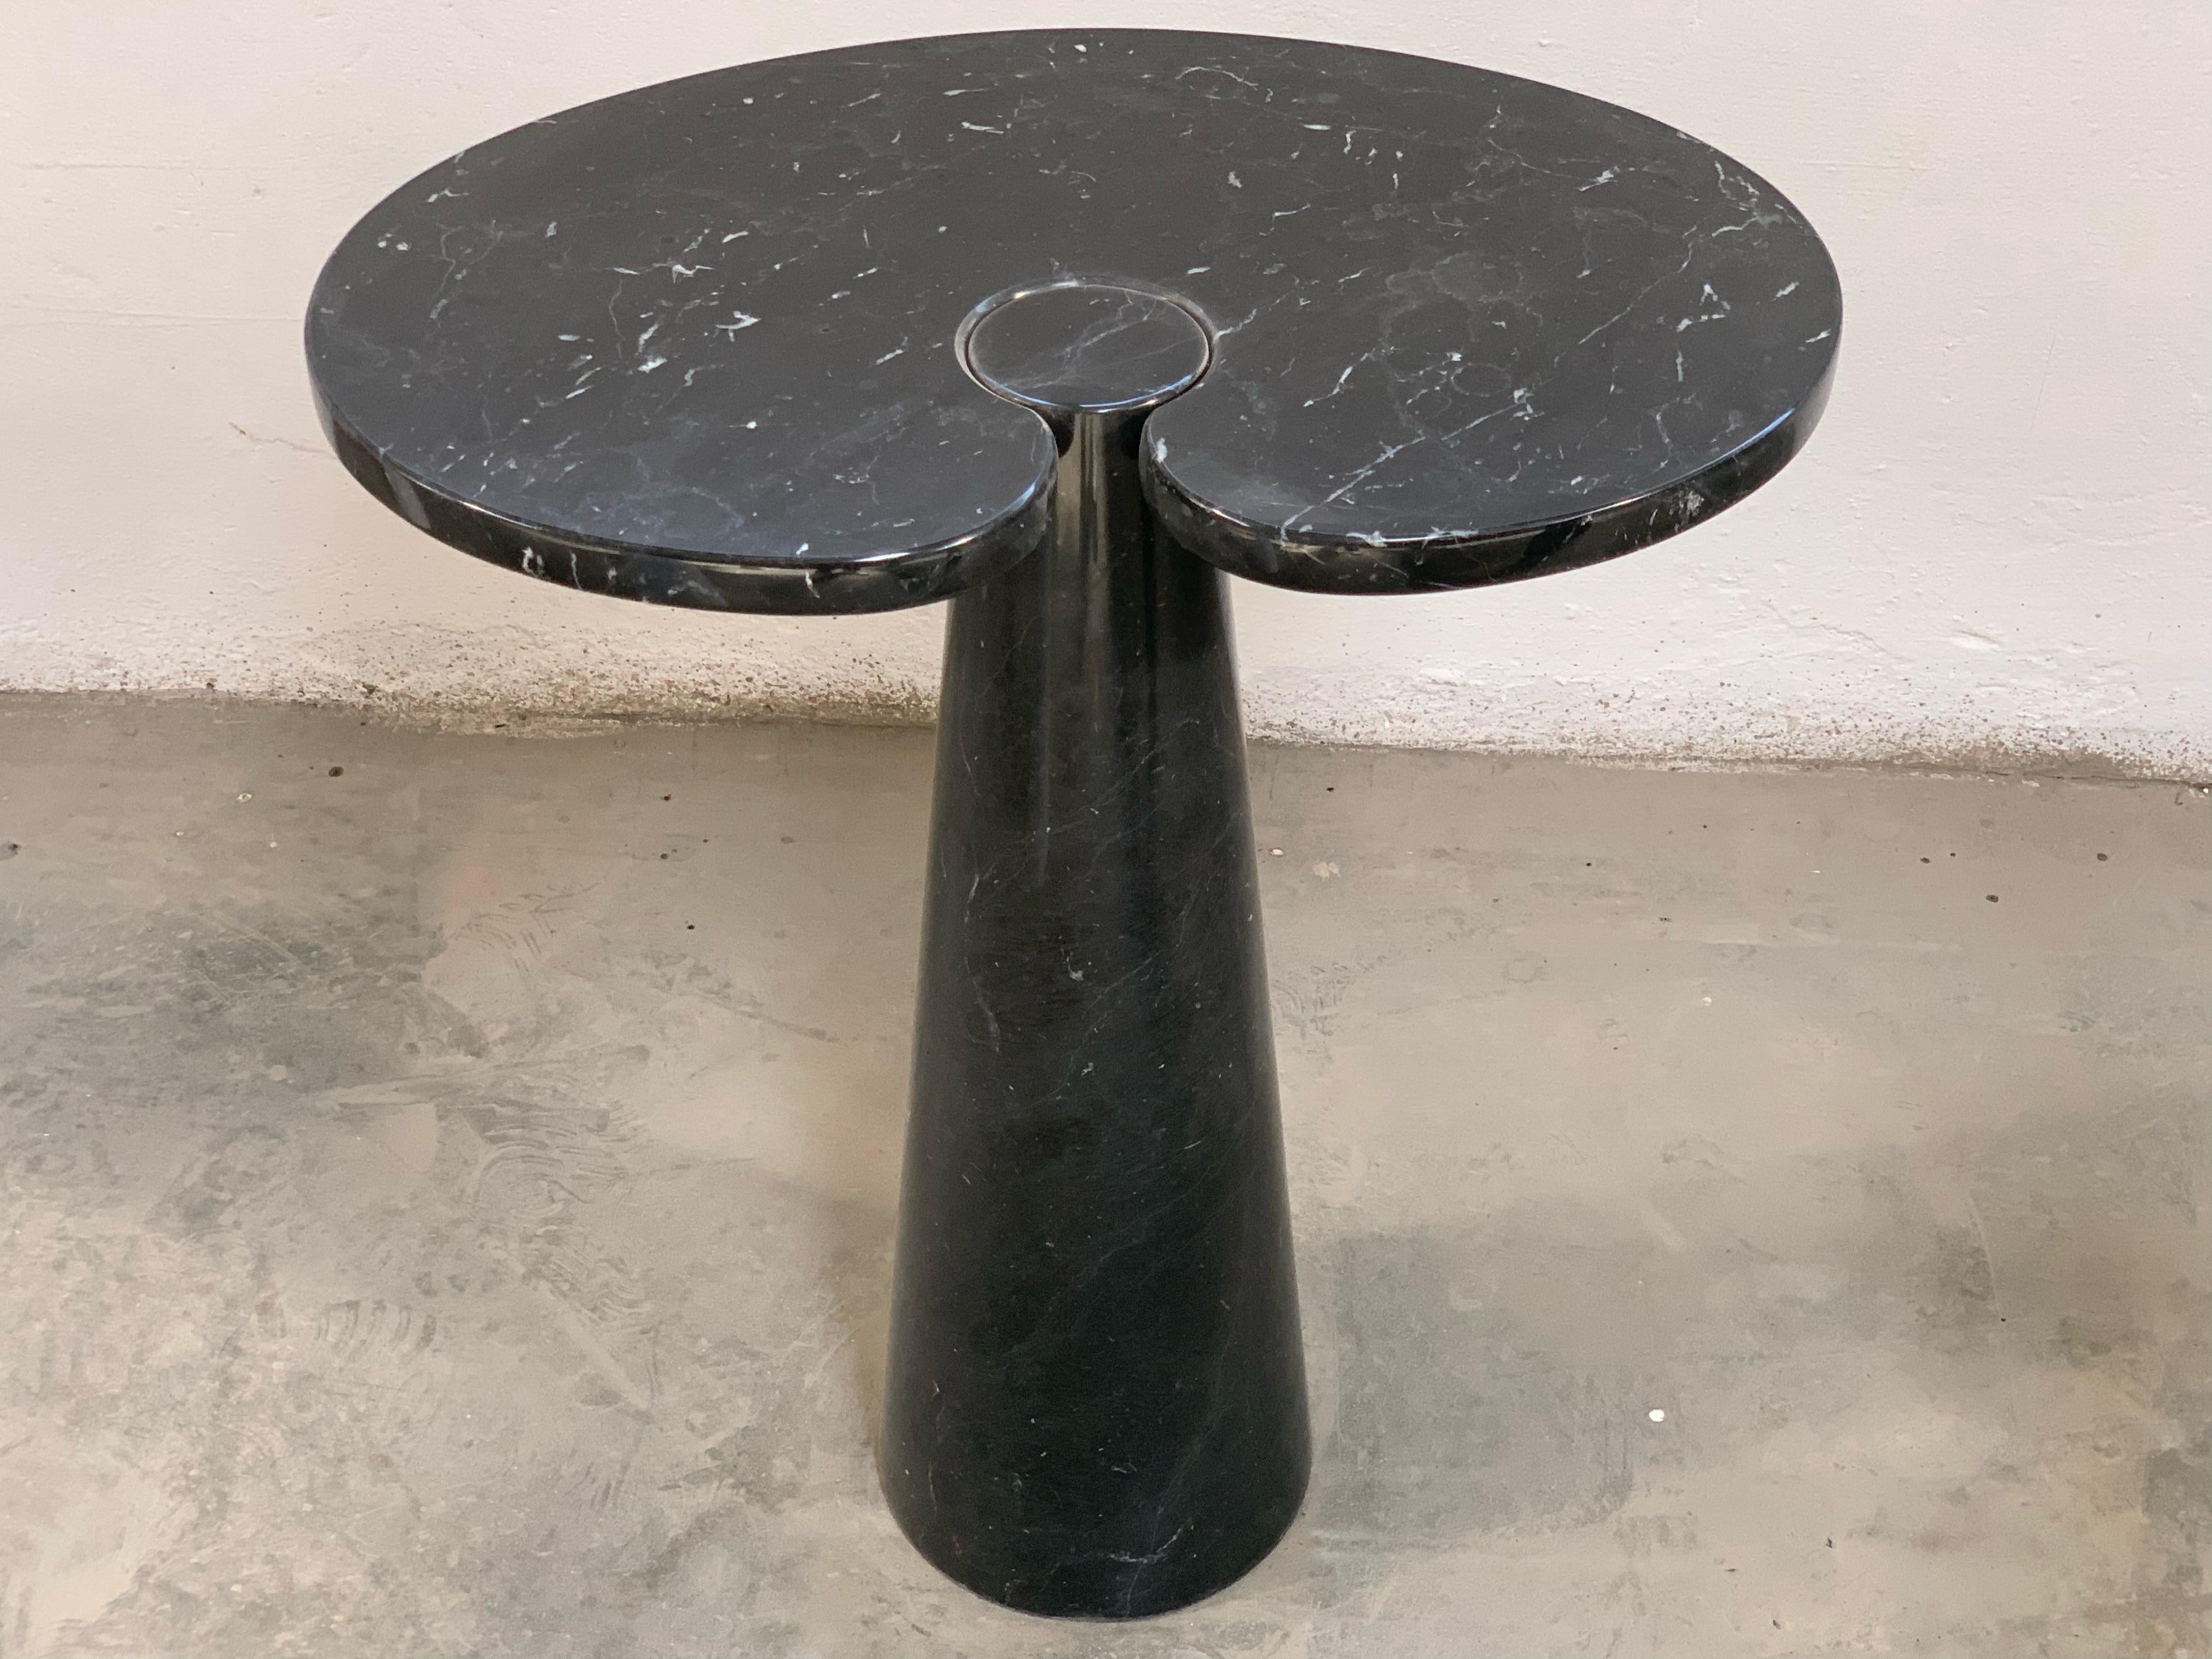 Gueridon Eros model in marble Mero Marquina designed by Angelo Mangiarotti and produced by Skipper in 1971.

Biography
ANGELO MANGIAROTTI was born in Milan on 26th of February 1921.
He graduated in Architecture in 1948 at Politecnico di Milano. In